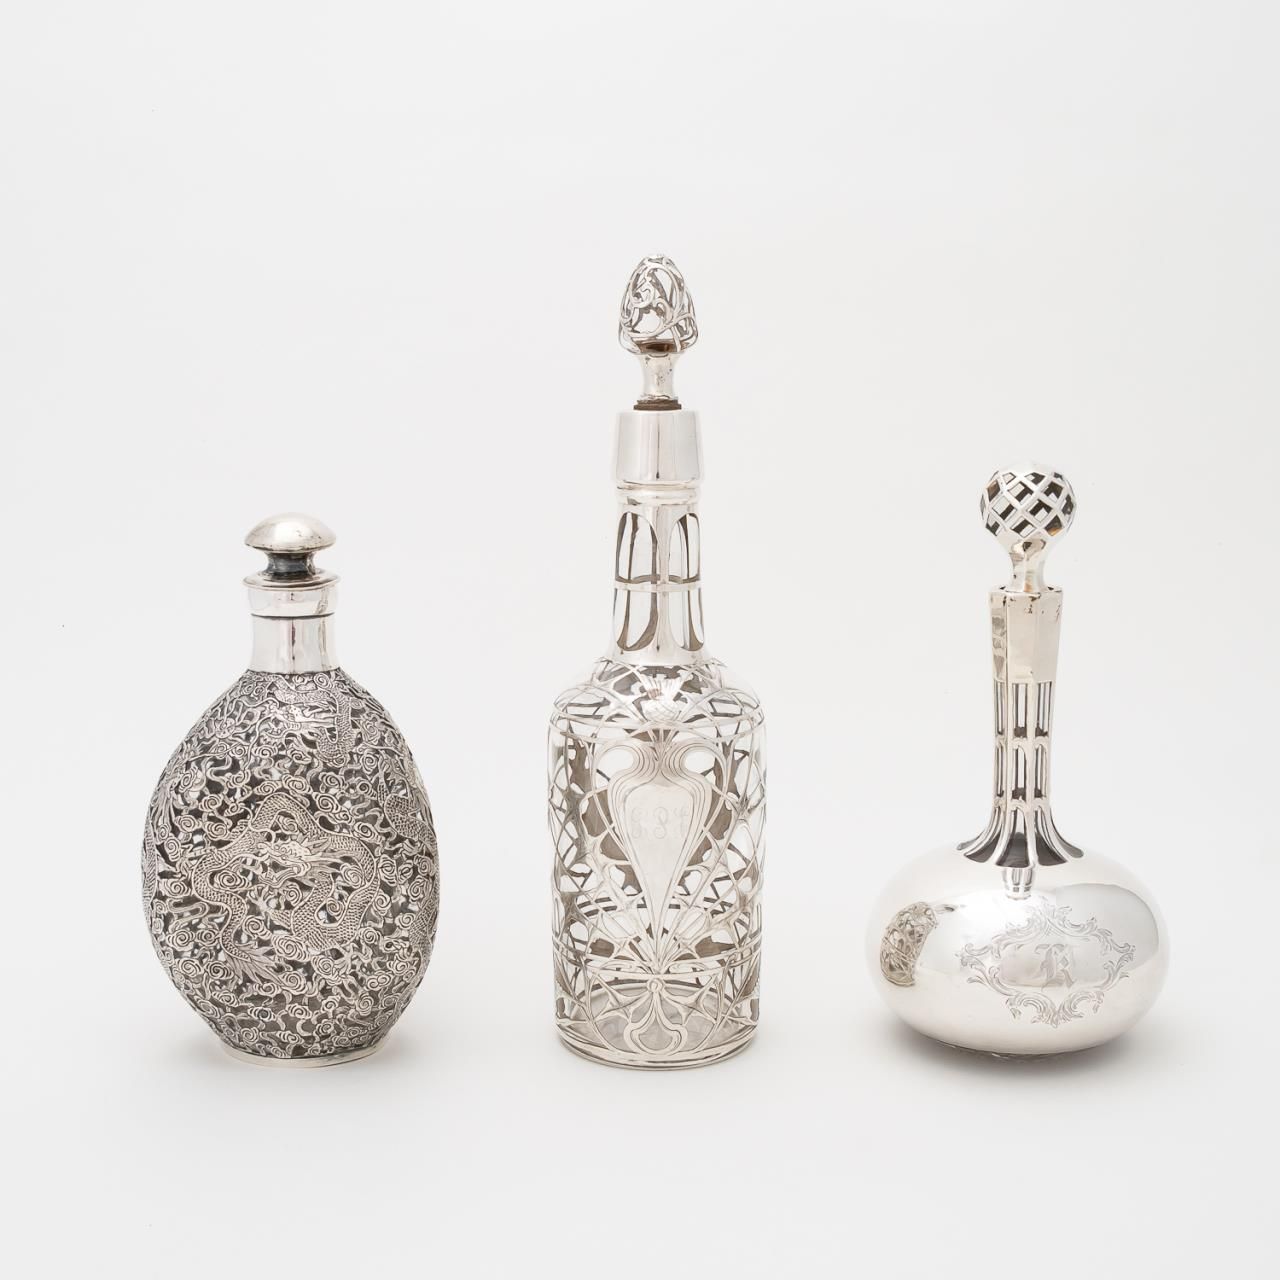 3 PCS STERLING OVERLAY DECANTERS  35dce8